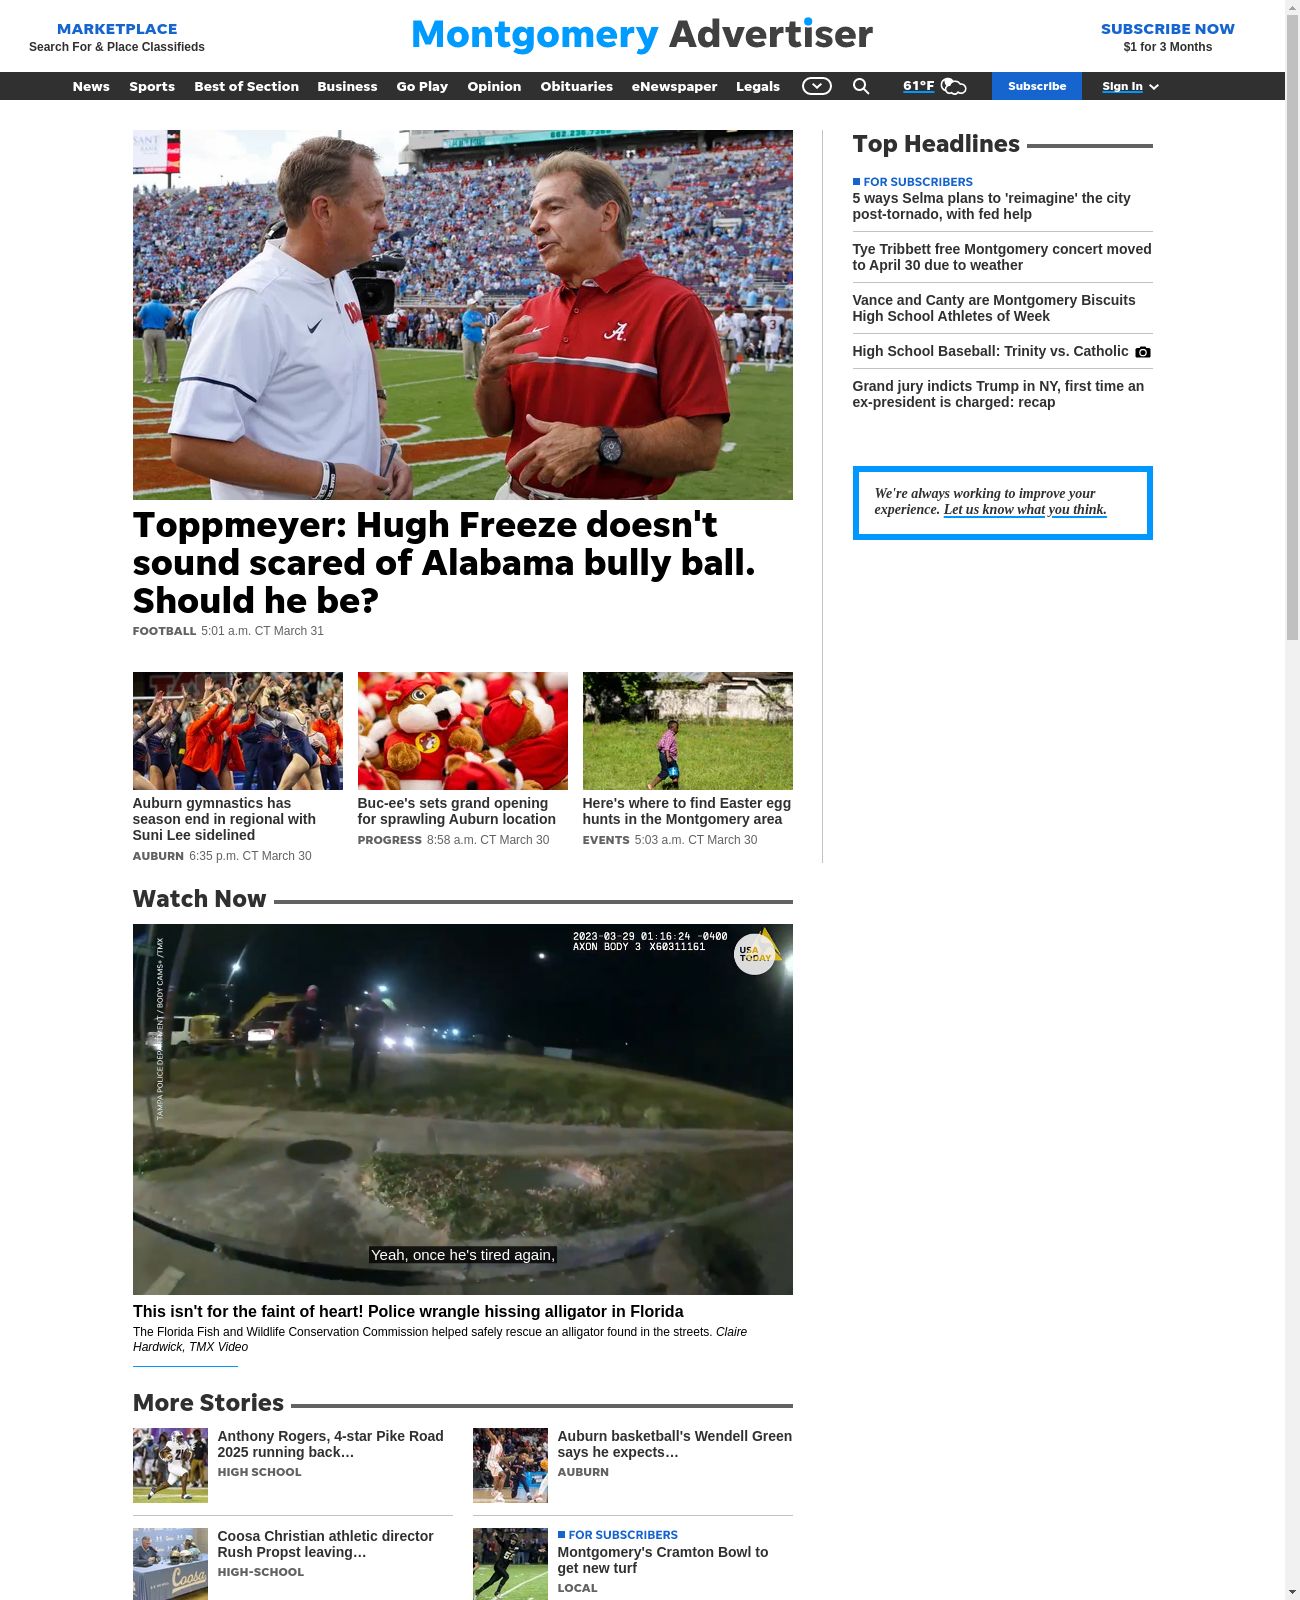 Montgomery Advertiser at 2023-03-31 06:31:20-05:00 local time